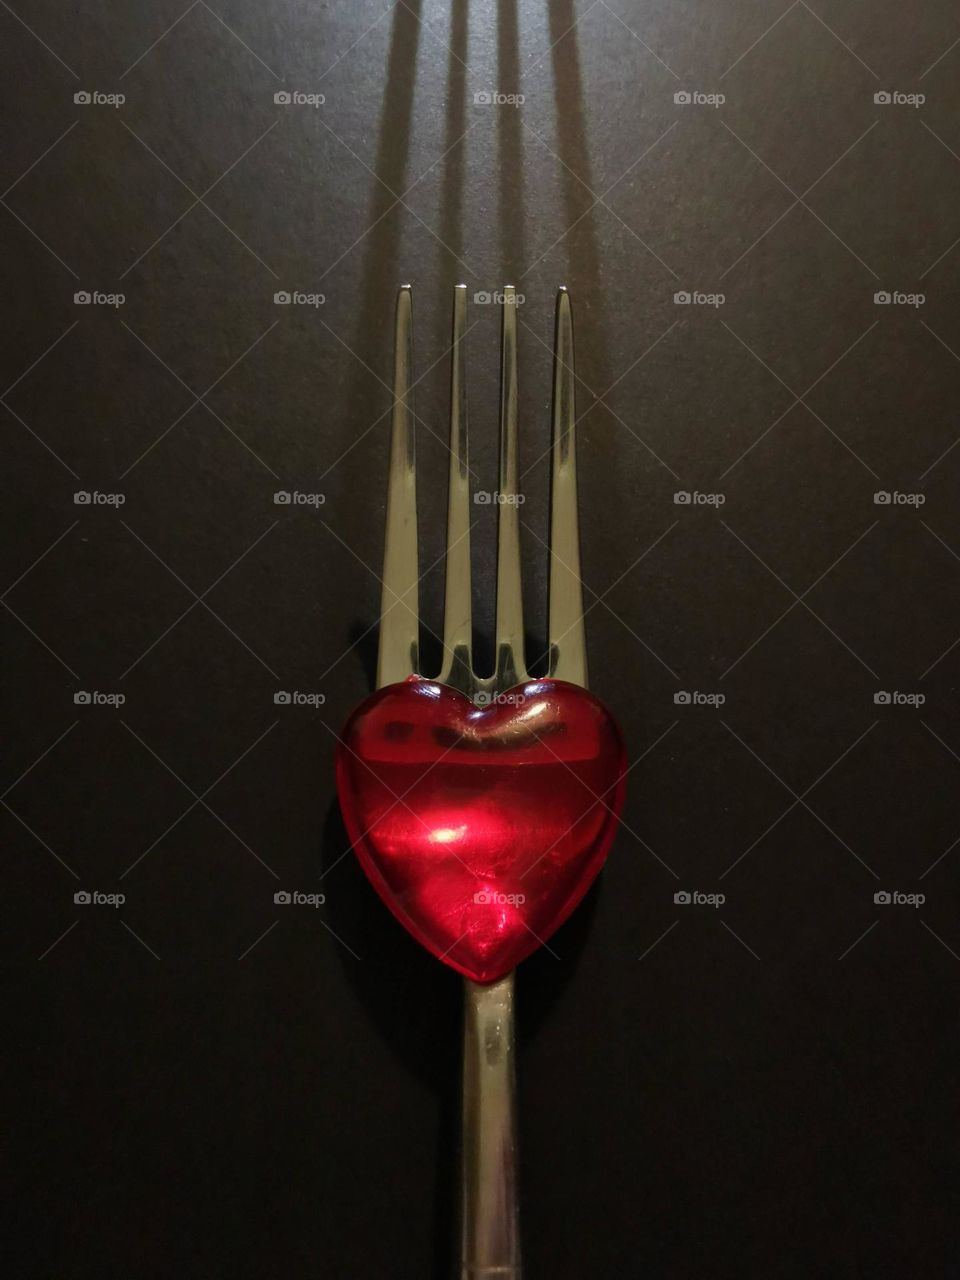 A kitchen fork and red heart. Not ordinary.